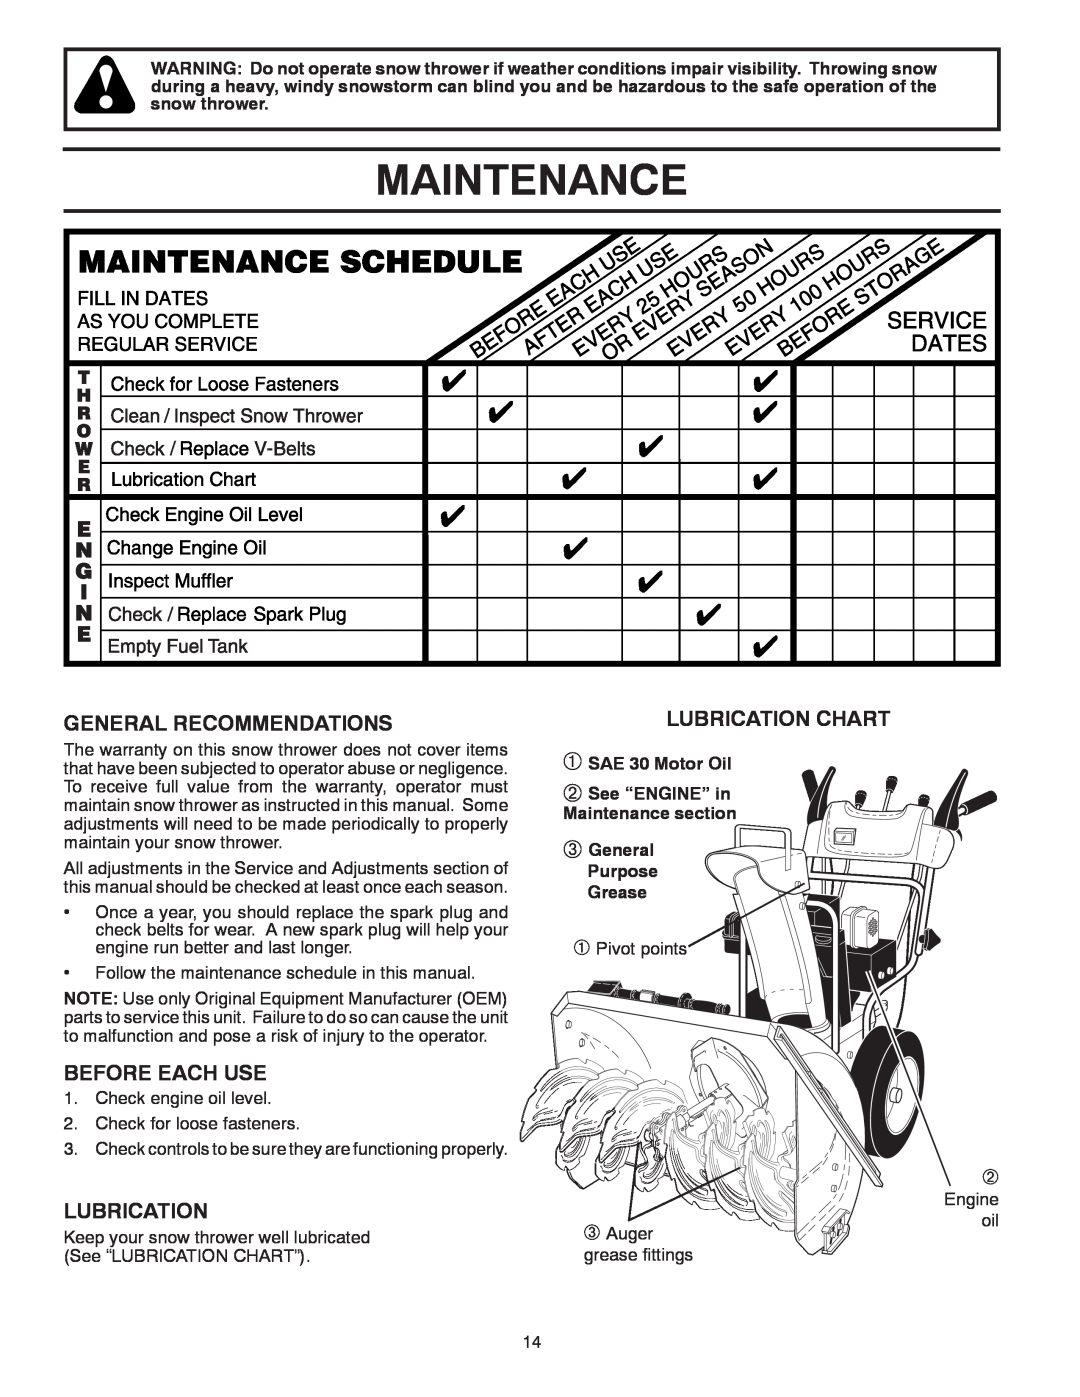 Husqvarna 1130SB-XLSB owner manual Maintenance, General Recommendations, Before Each Use, Lubrication Chart 